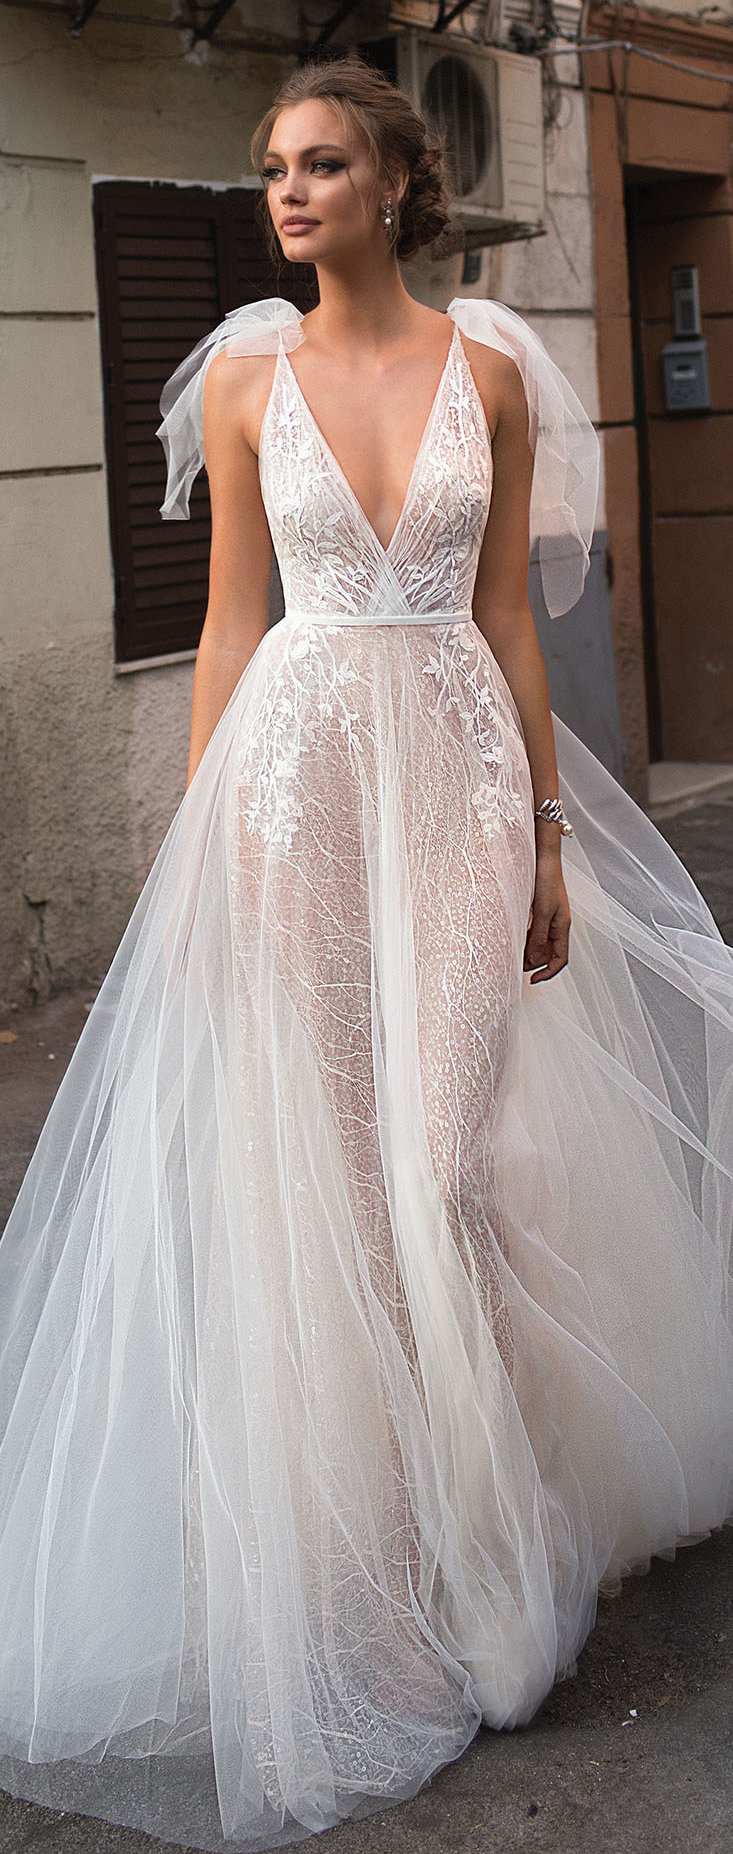 MUSE by Berta : Sicily Wedding Dress Collection - Belle The Magazine